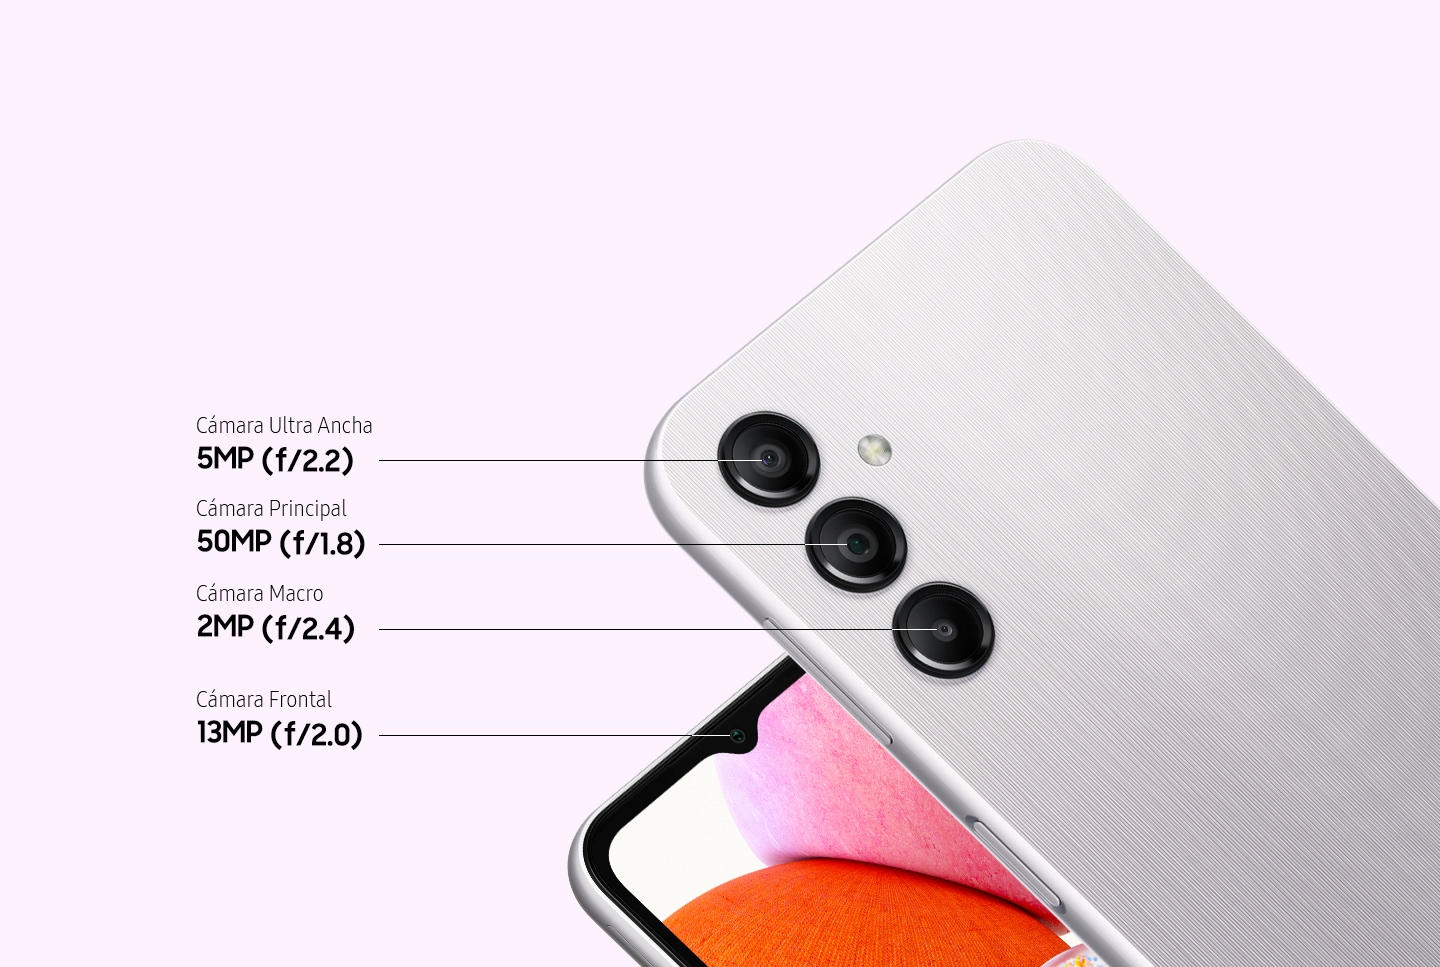 Two devices, both in Silver, show the rear side and front side of the device. On the right, the rear side of the device shows the 5MP f2.2 Ultra-wide camera, 50MP f1.8 Main camera, and 2MP f2.4 Macro camera. On the left, the front side of the device shows the 13MP f2.0 Front camera.